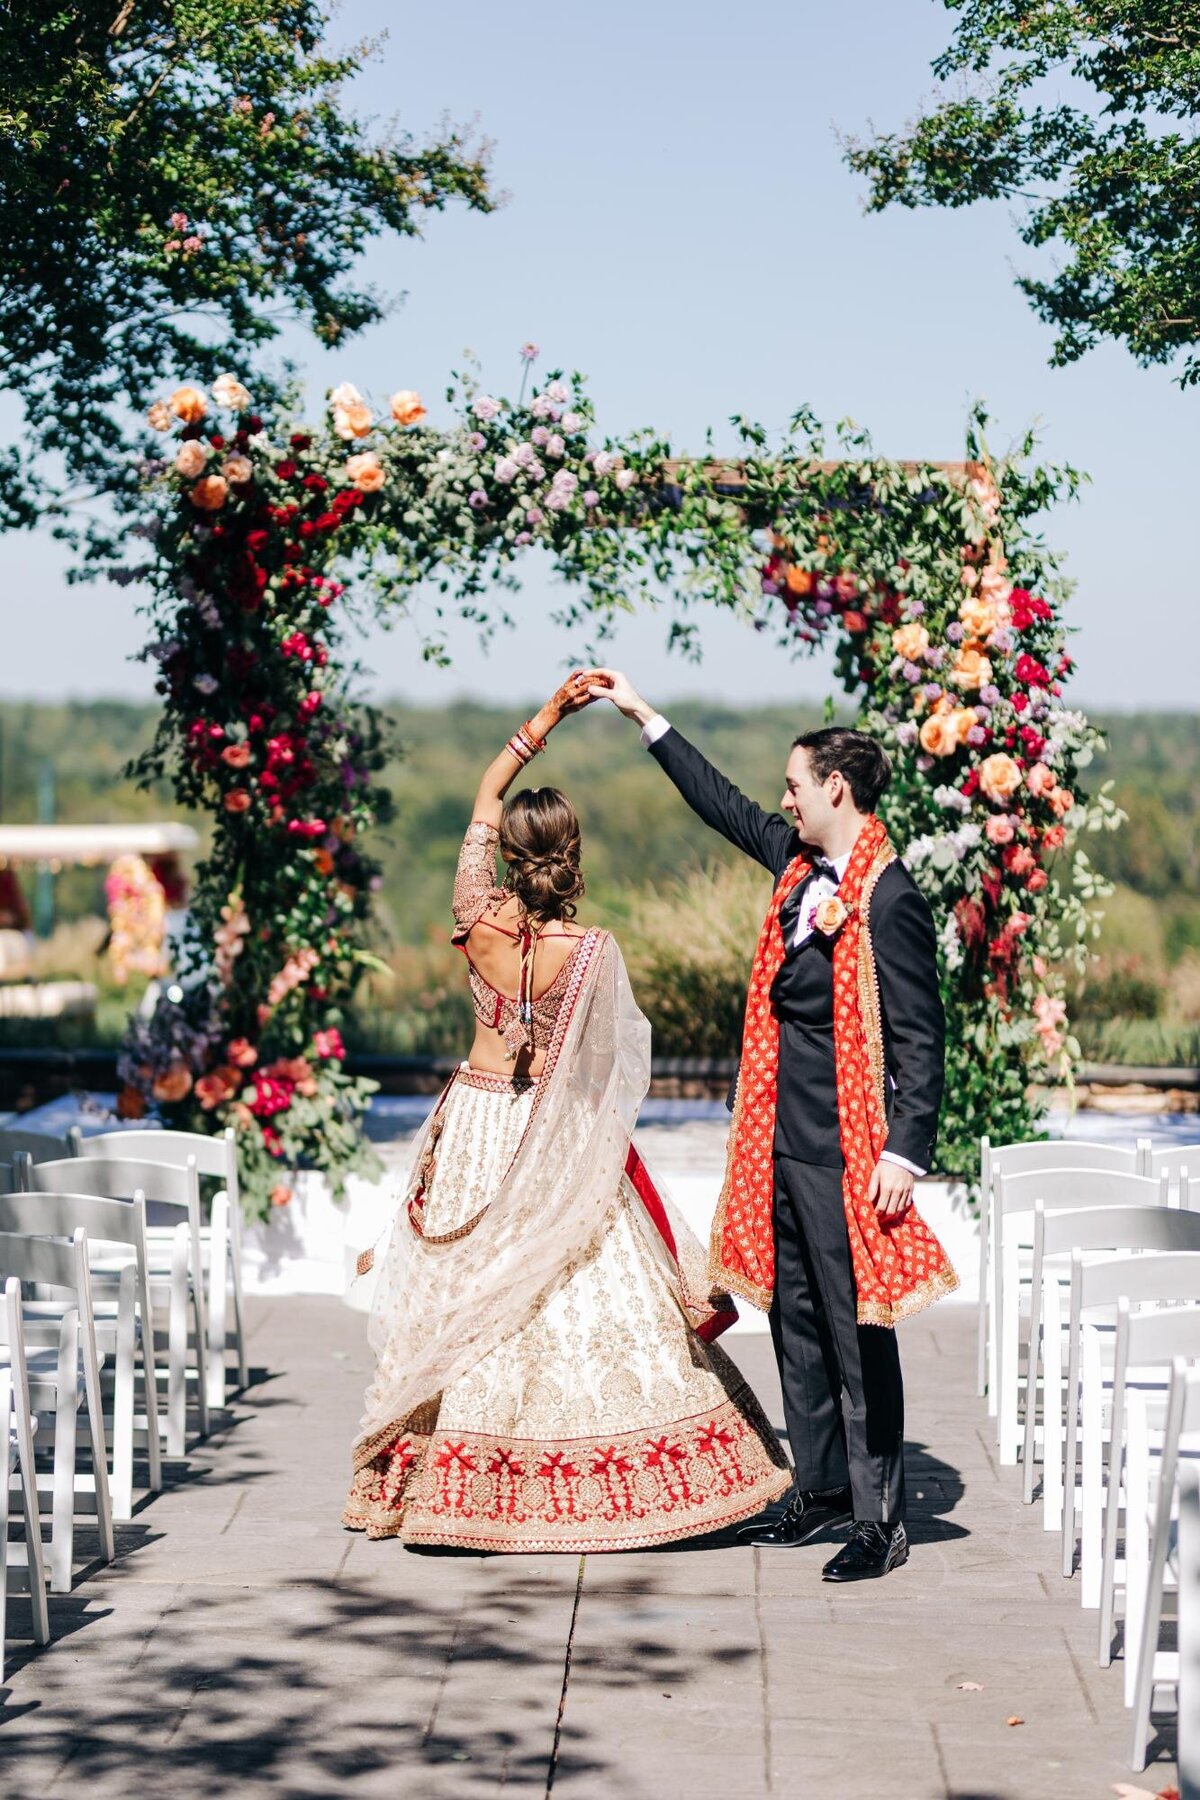 A couple in traditional indian attire sharing a dance under a floral archway at an outdoor wedding venue.